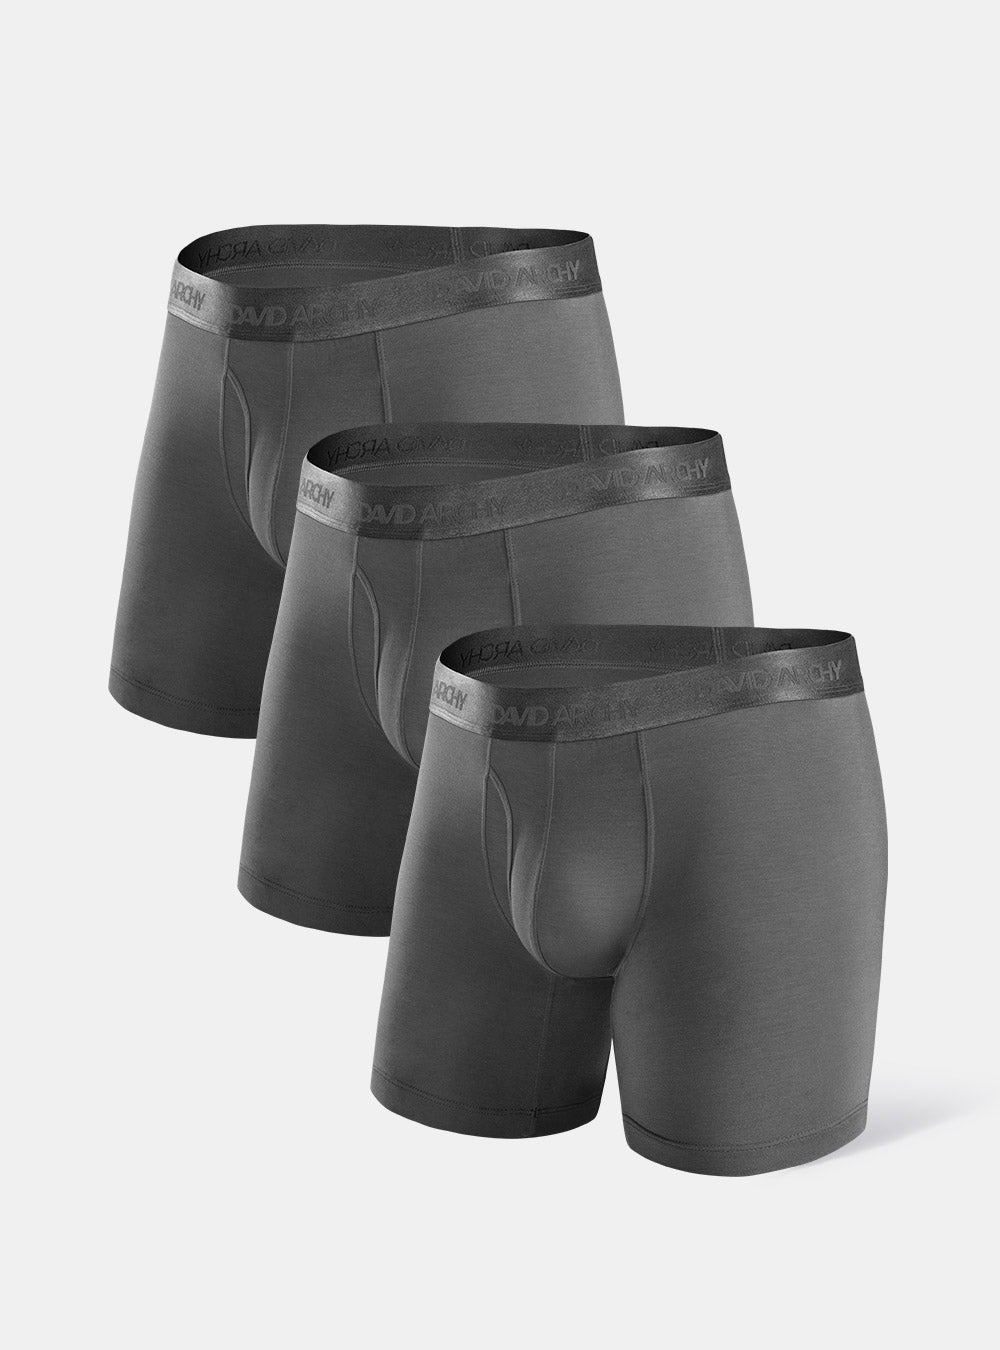 Classic Style Micro Modal Ultra Soft Trunks Dual Pouch Men's Underwear -  Separatec